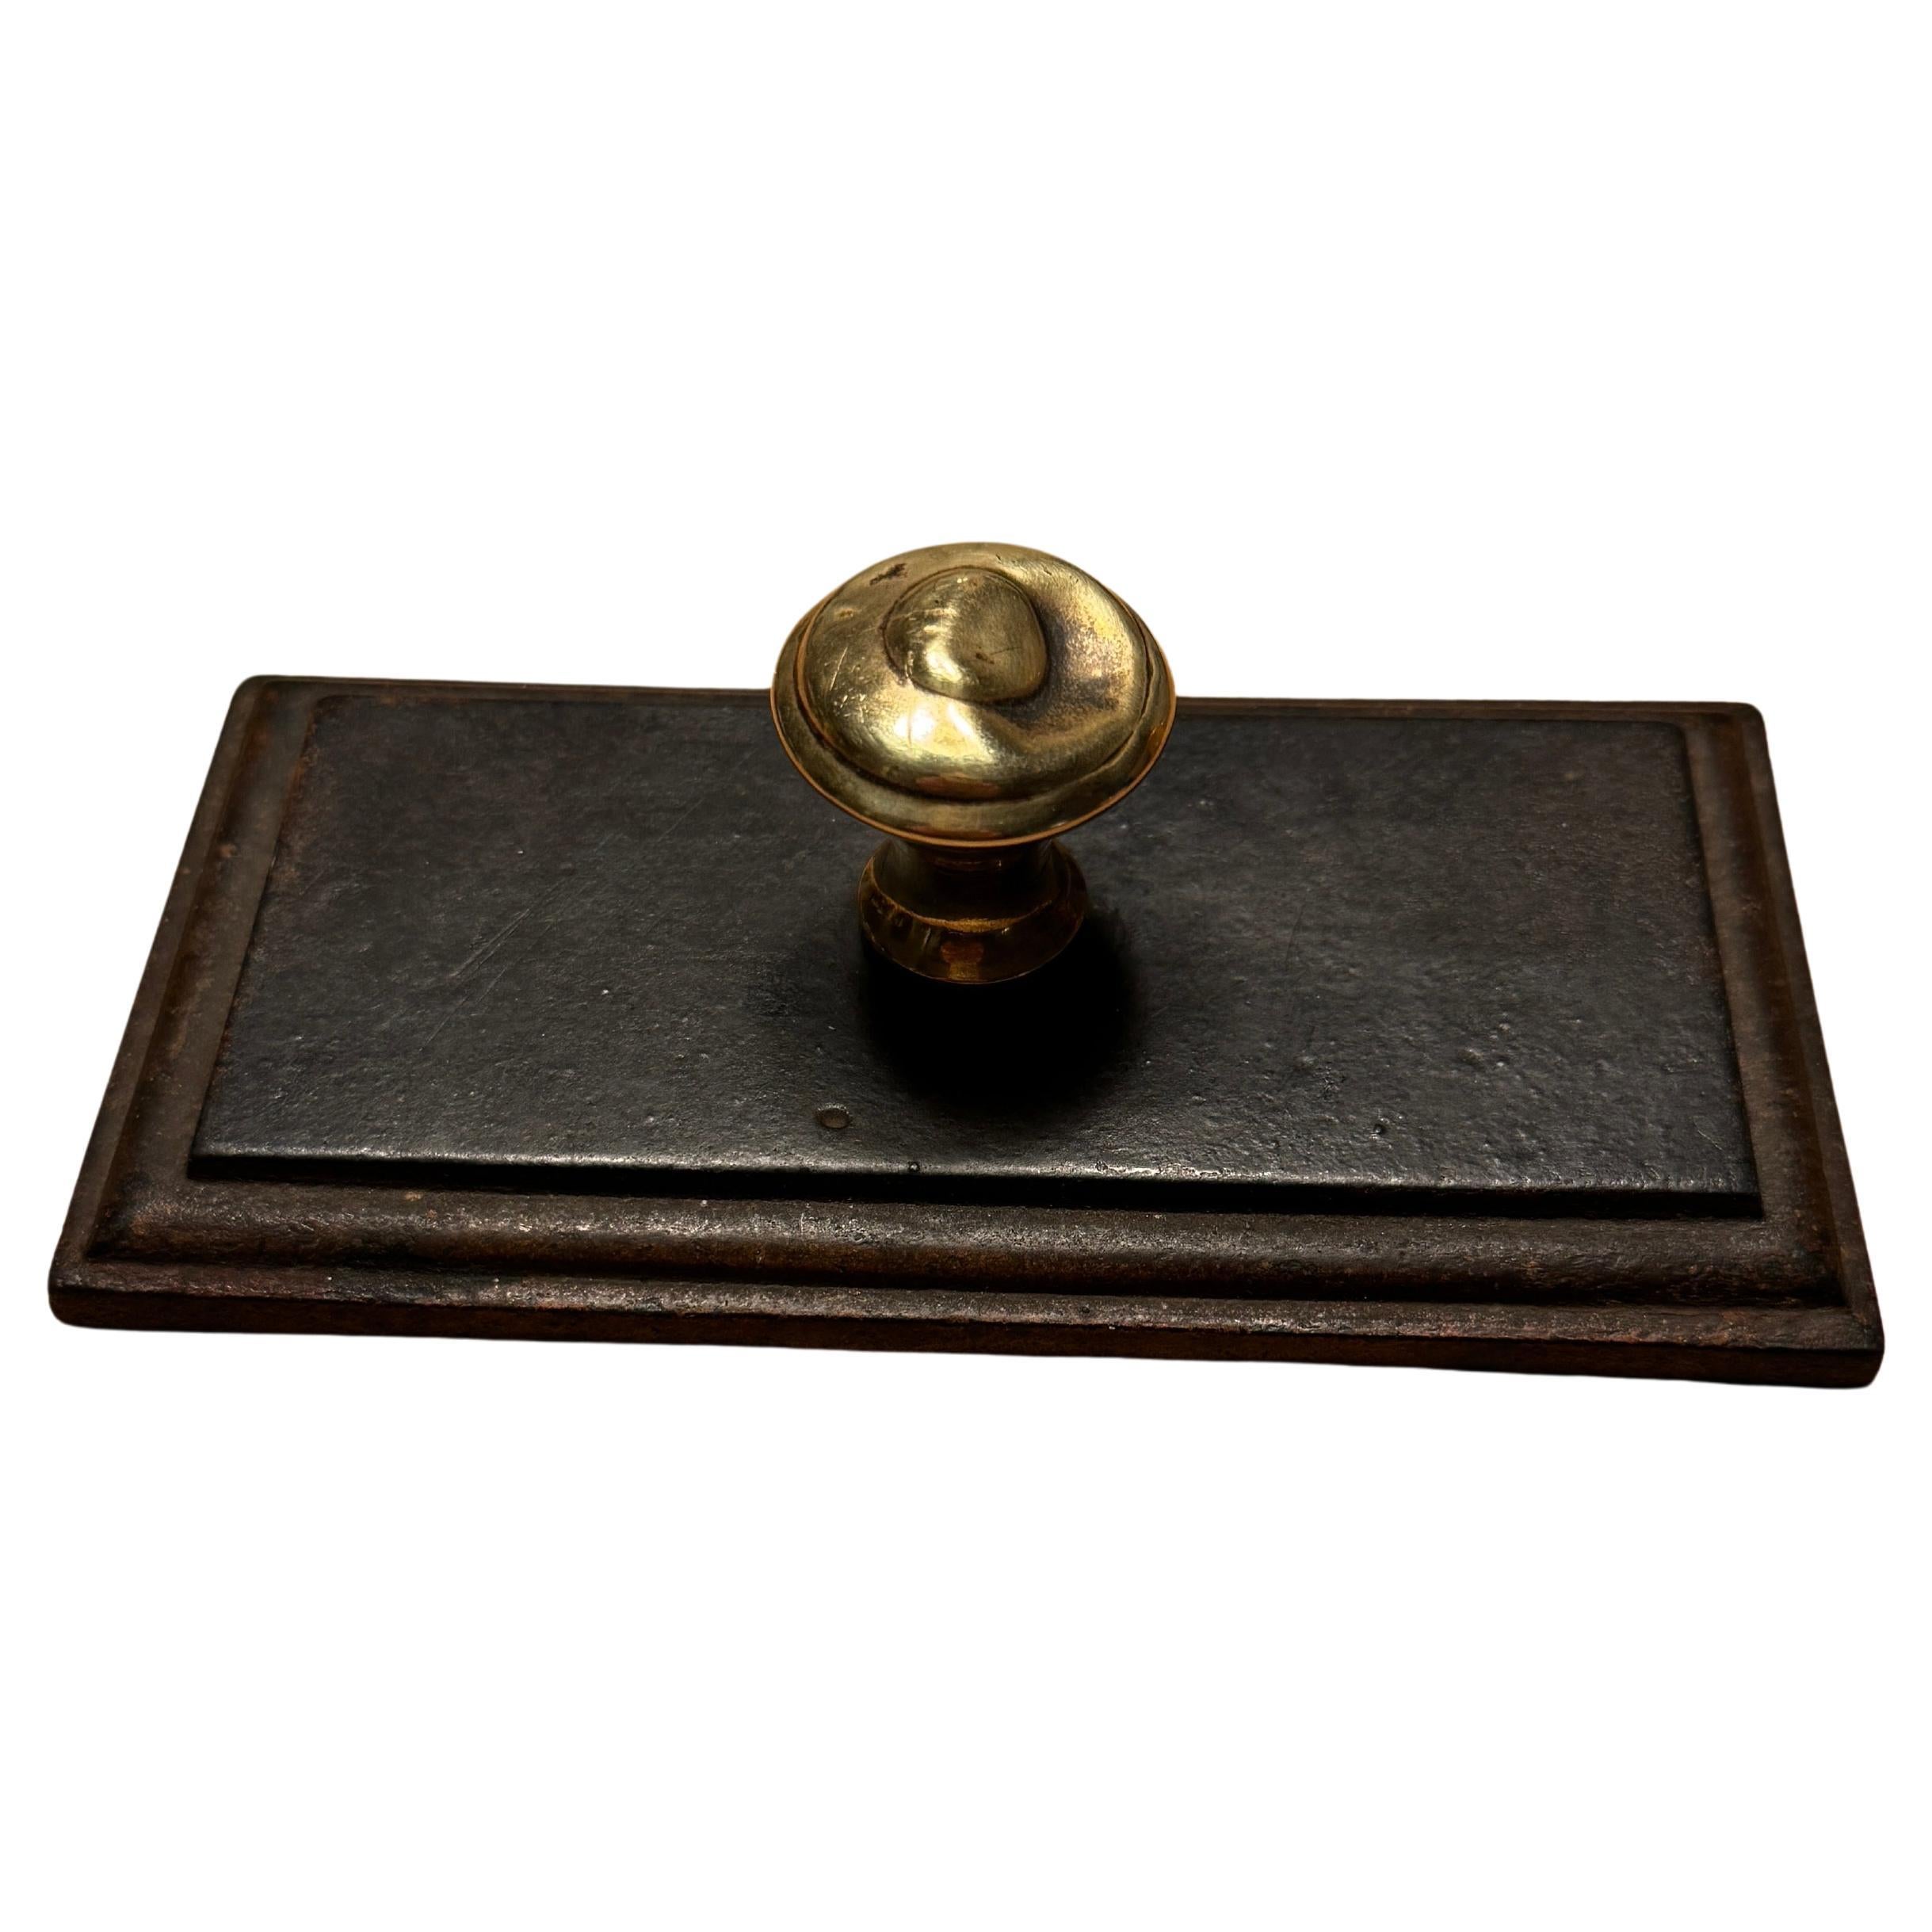 Victorian Brass Knob and Bevelled Iron Paperweight, England 1840's For Sale